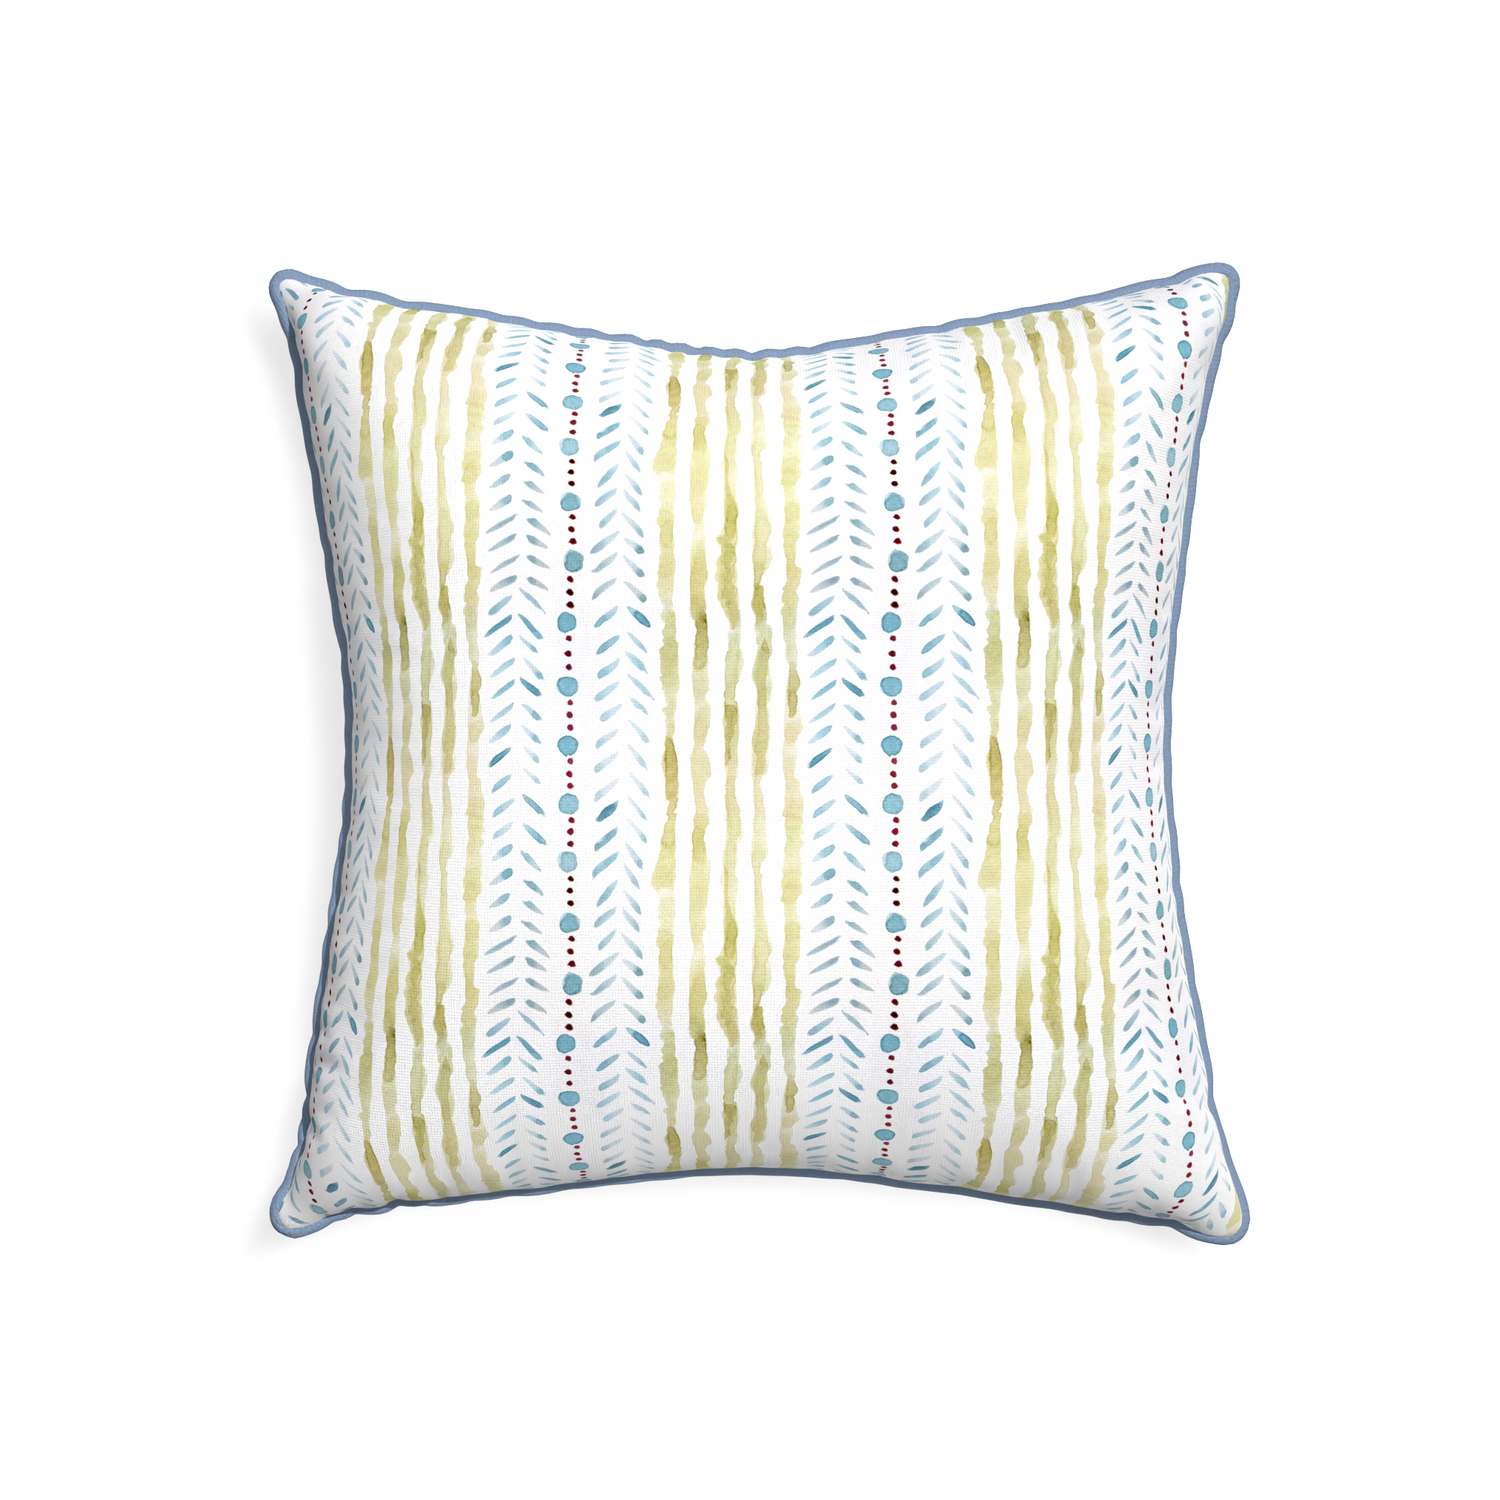 22-square julia custom blue & green stripedpillow with sky piping on white background